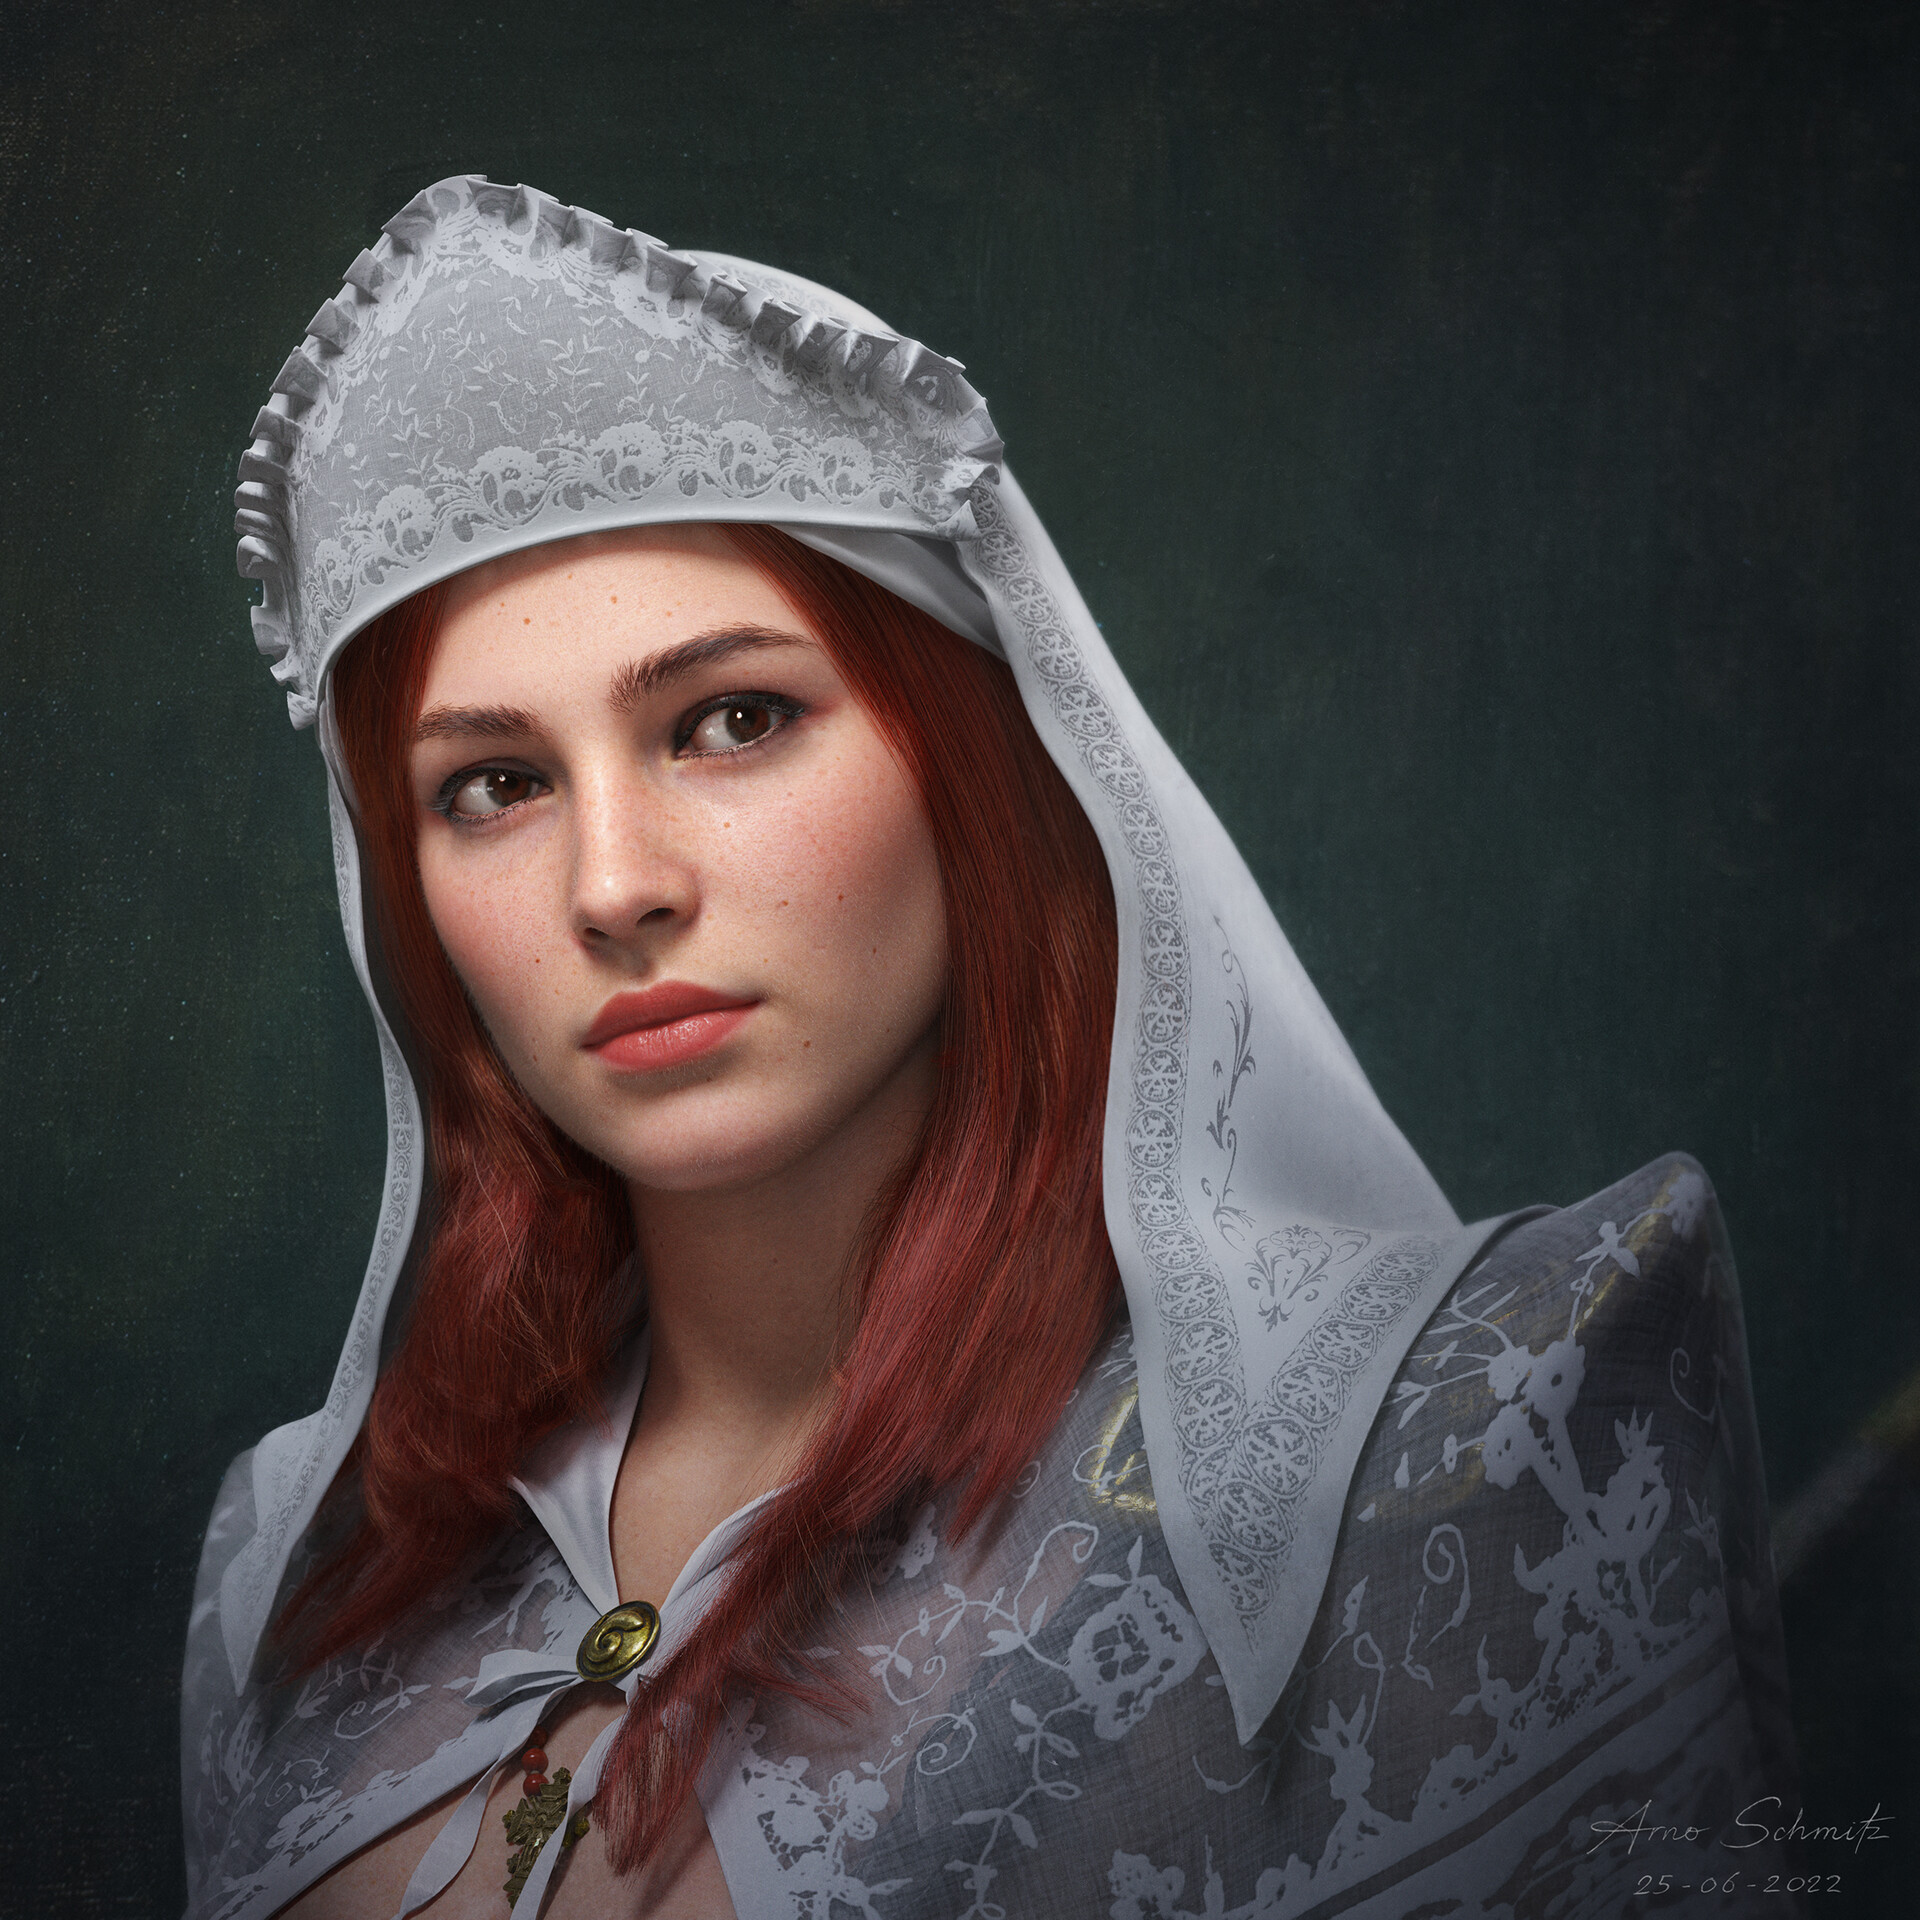 General 1920x1920 Arno Schmitz CGI women redhead cleric veils white clothing brown eyes looking away freckles simple background portrait